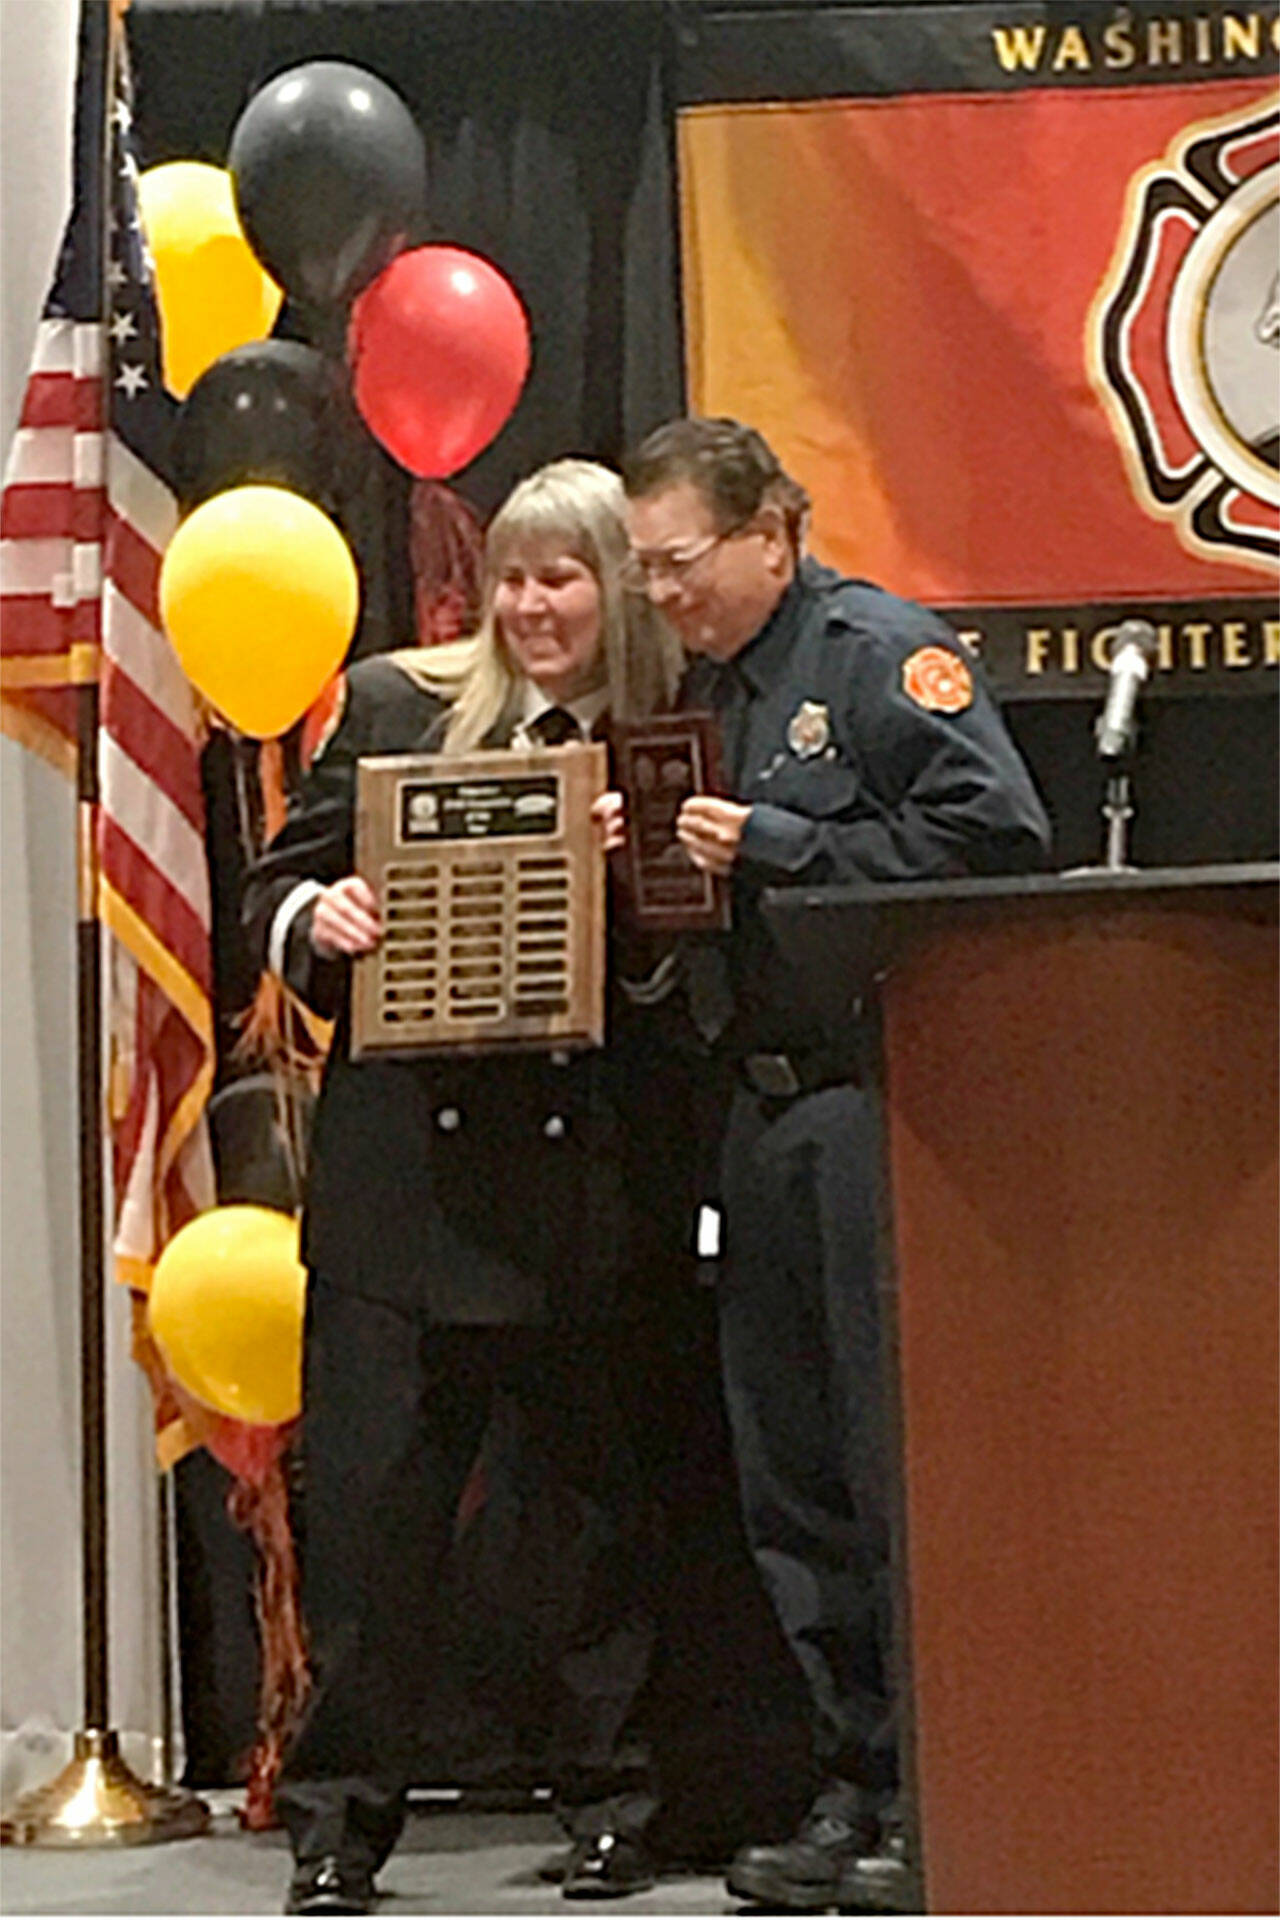 Blaine Zechenelly receives the Washington Volunteer EMS Responder of the Year award on May 20 at the Washington State Fire Fighters’ Association’s (WSFFA) 100th anniversary conference in Wenatchee. (Clallam County Fire District 3)